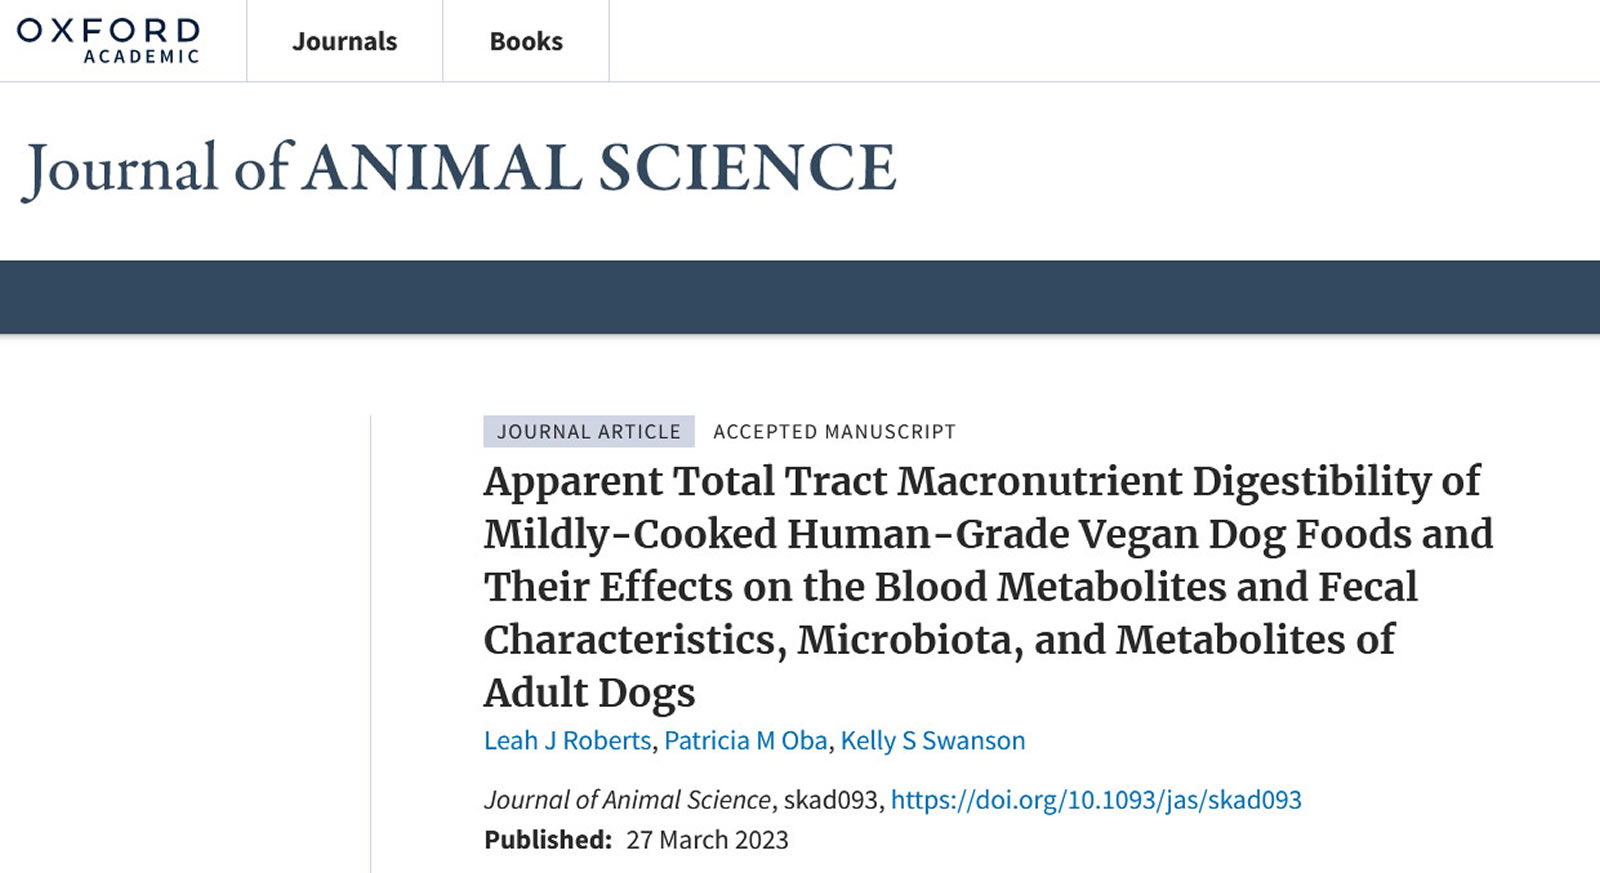 Journal animal science giving thumbs up to homecooked supplemented vegan dog food